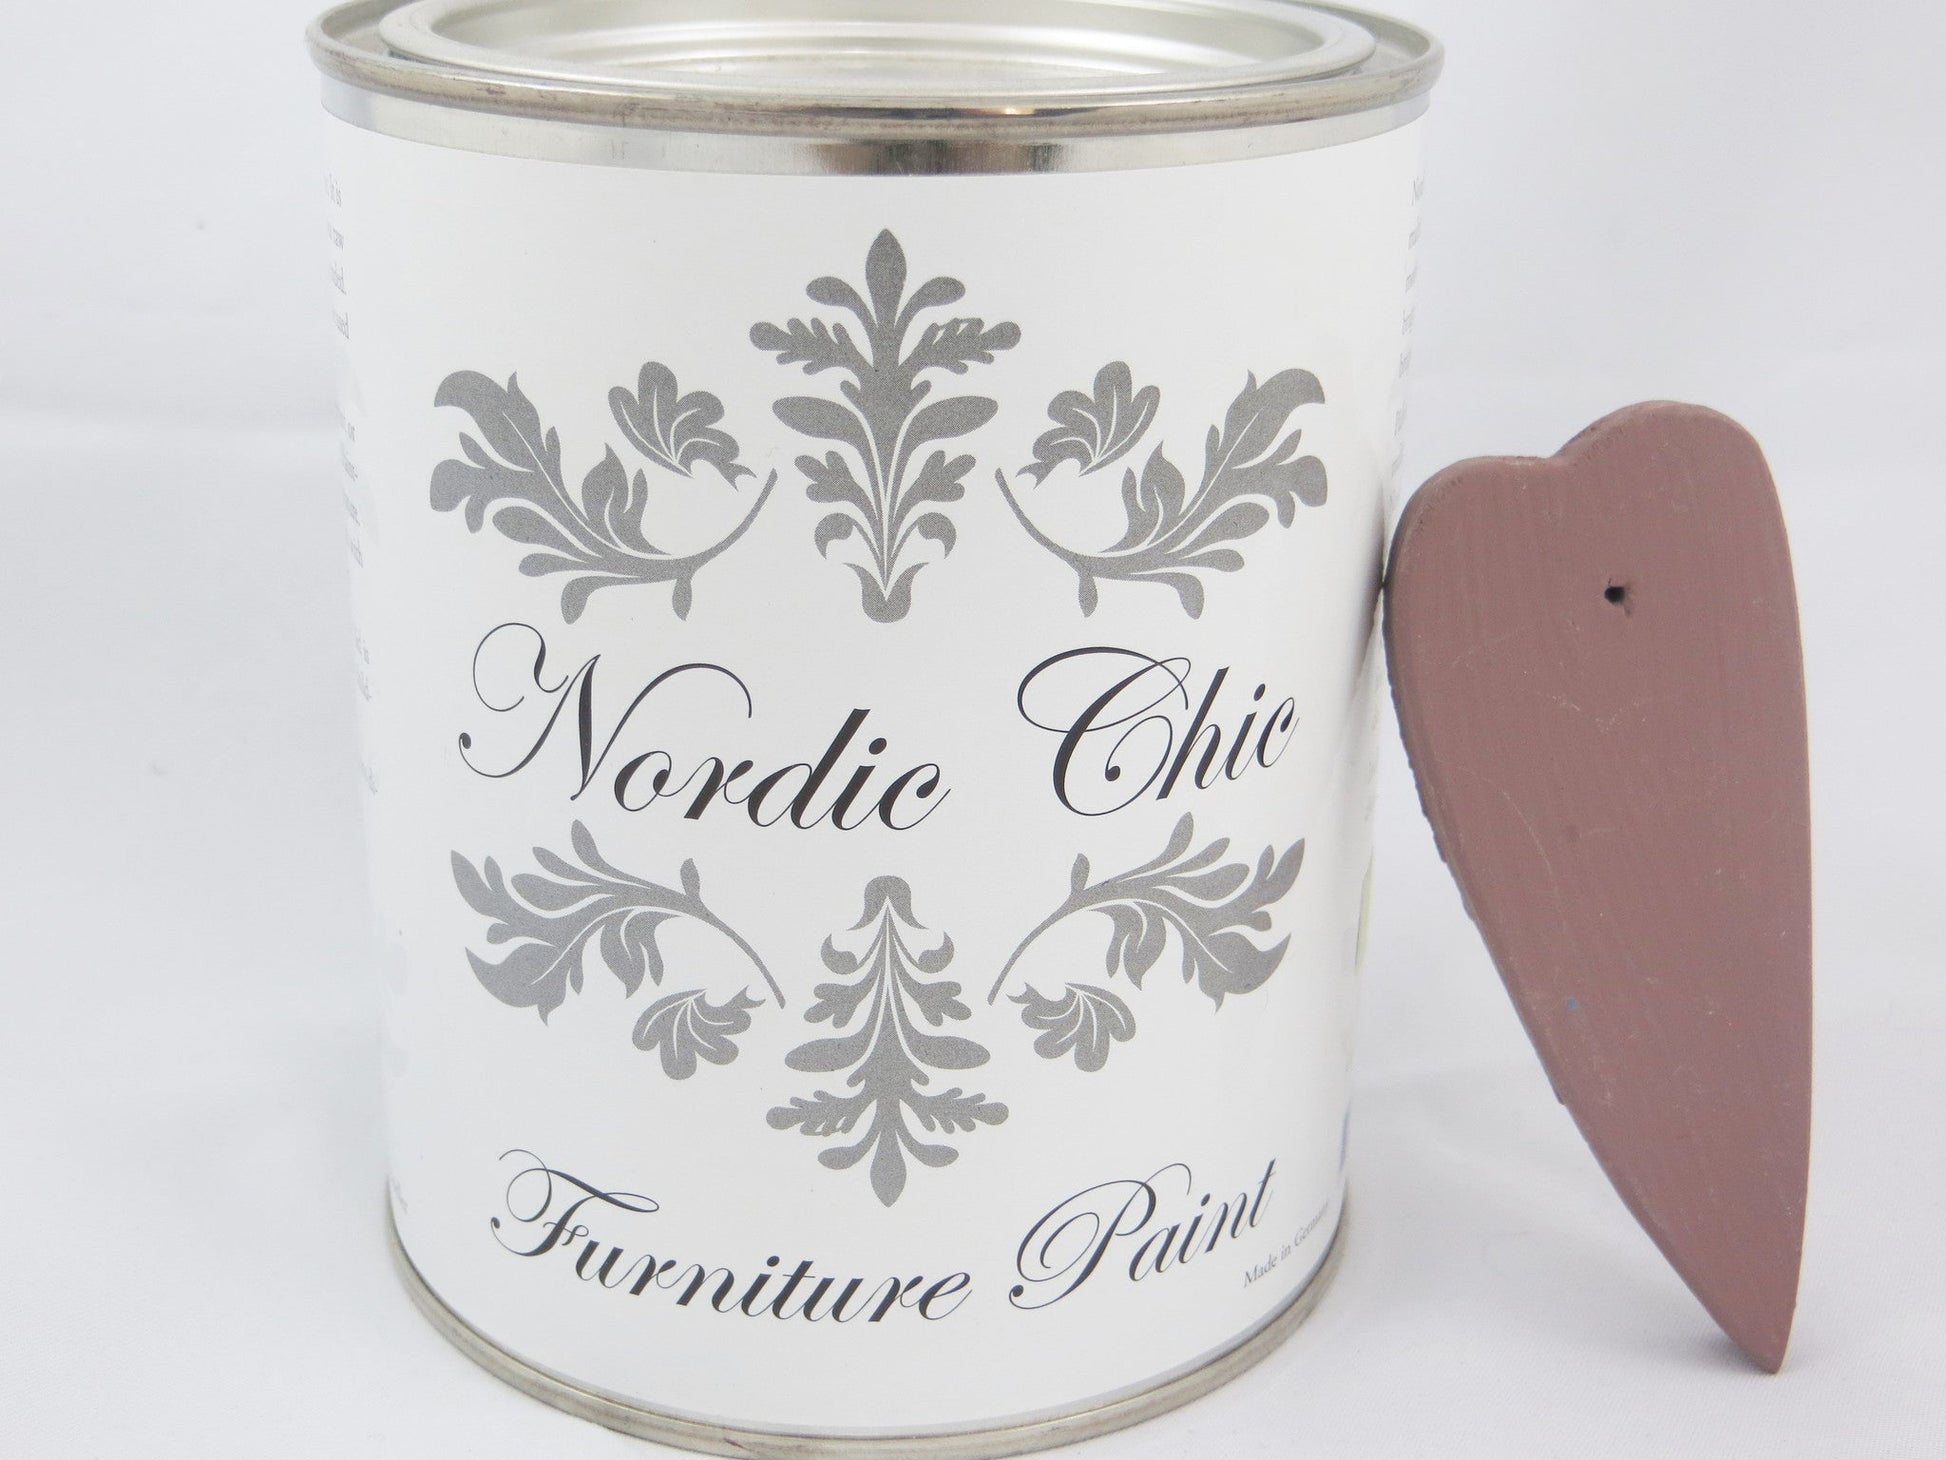 Nordic Chic Furniture Paint - Taupe - Nordic Chic®